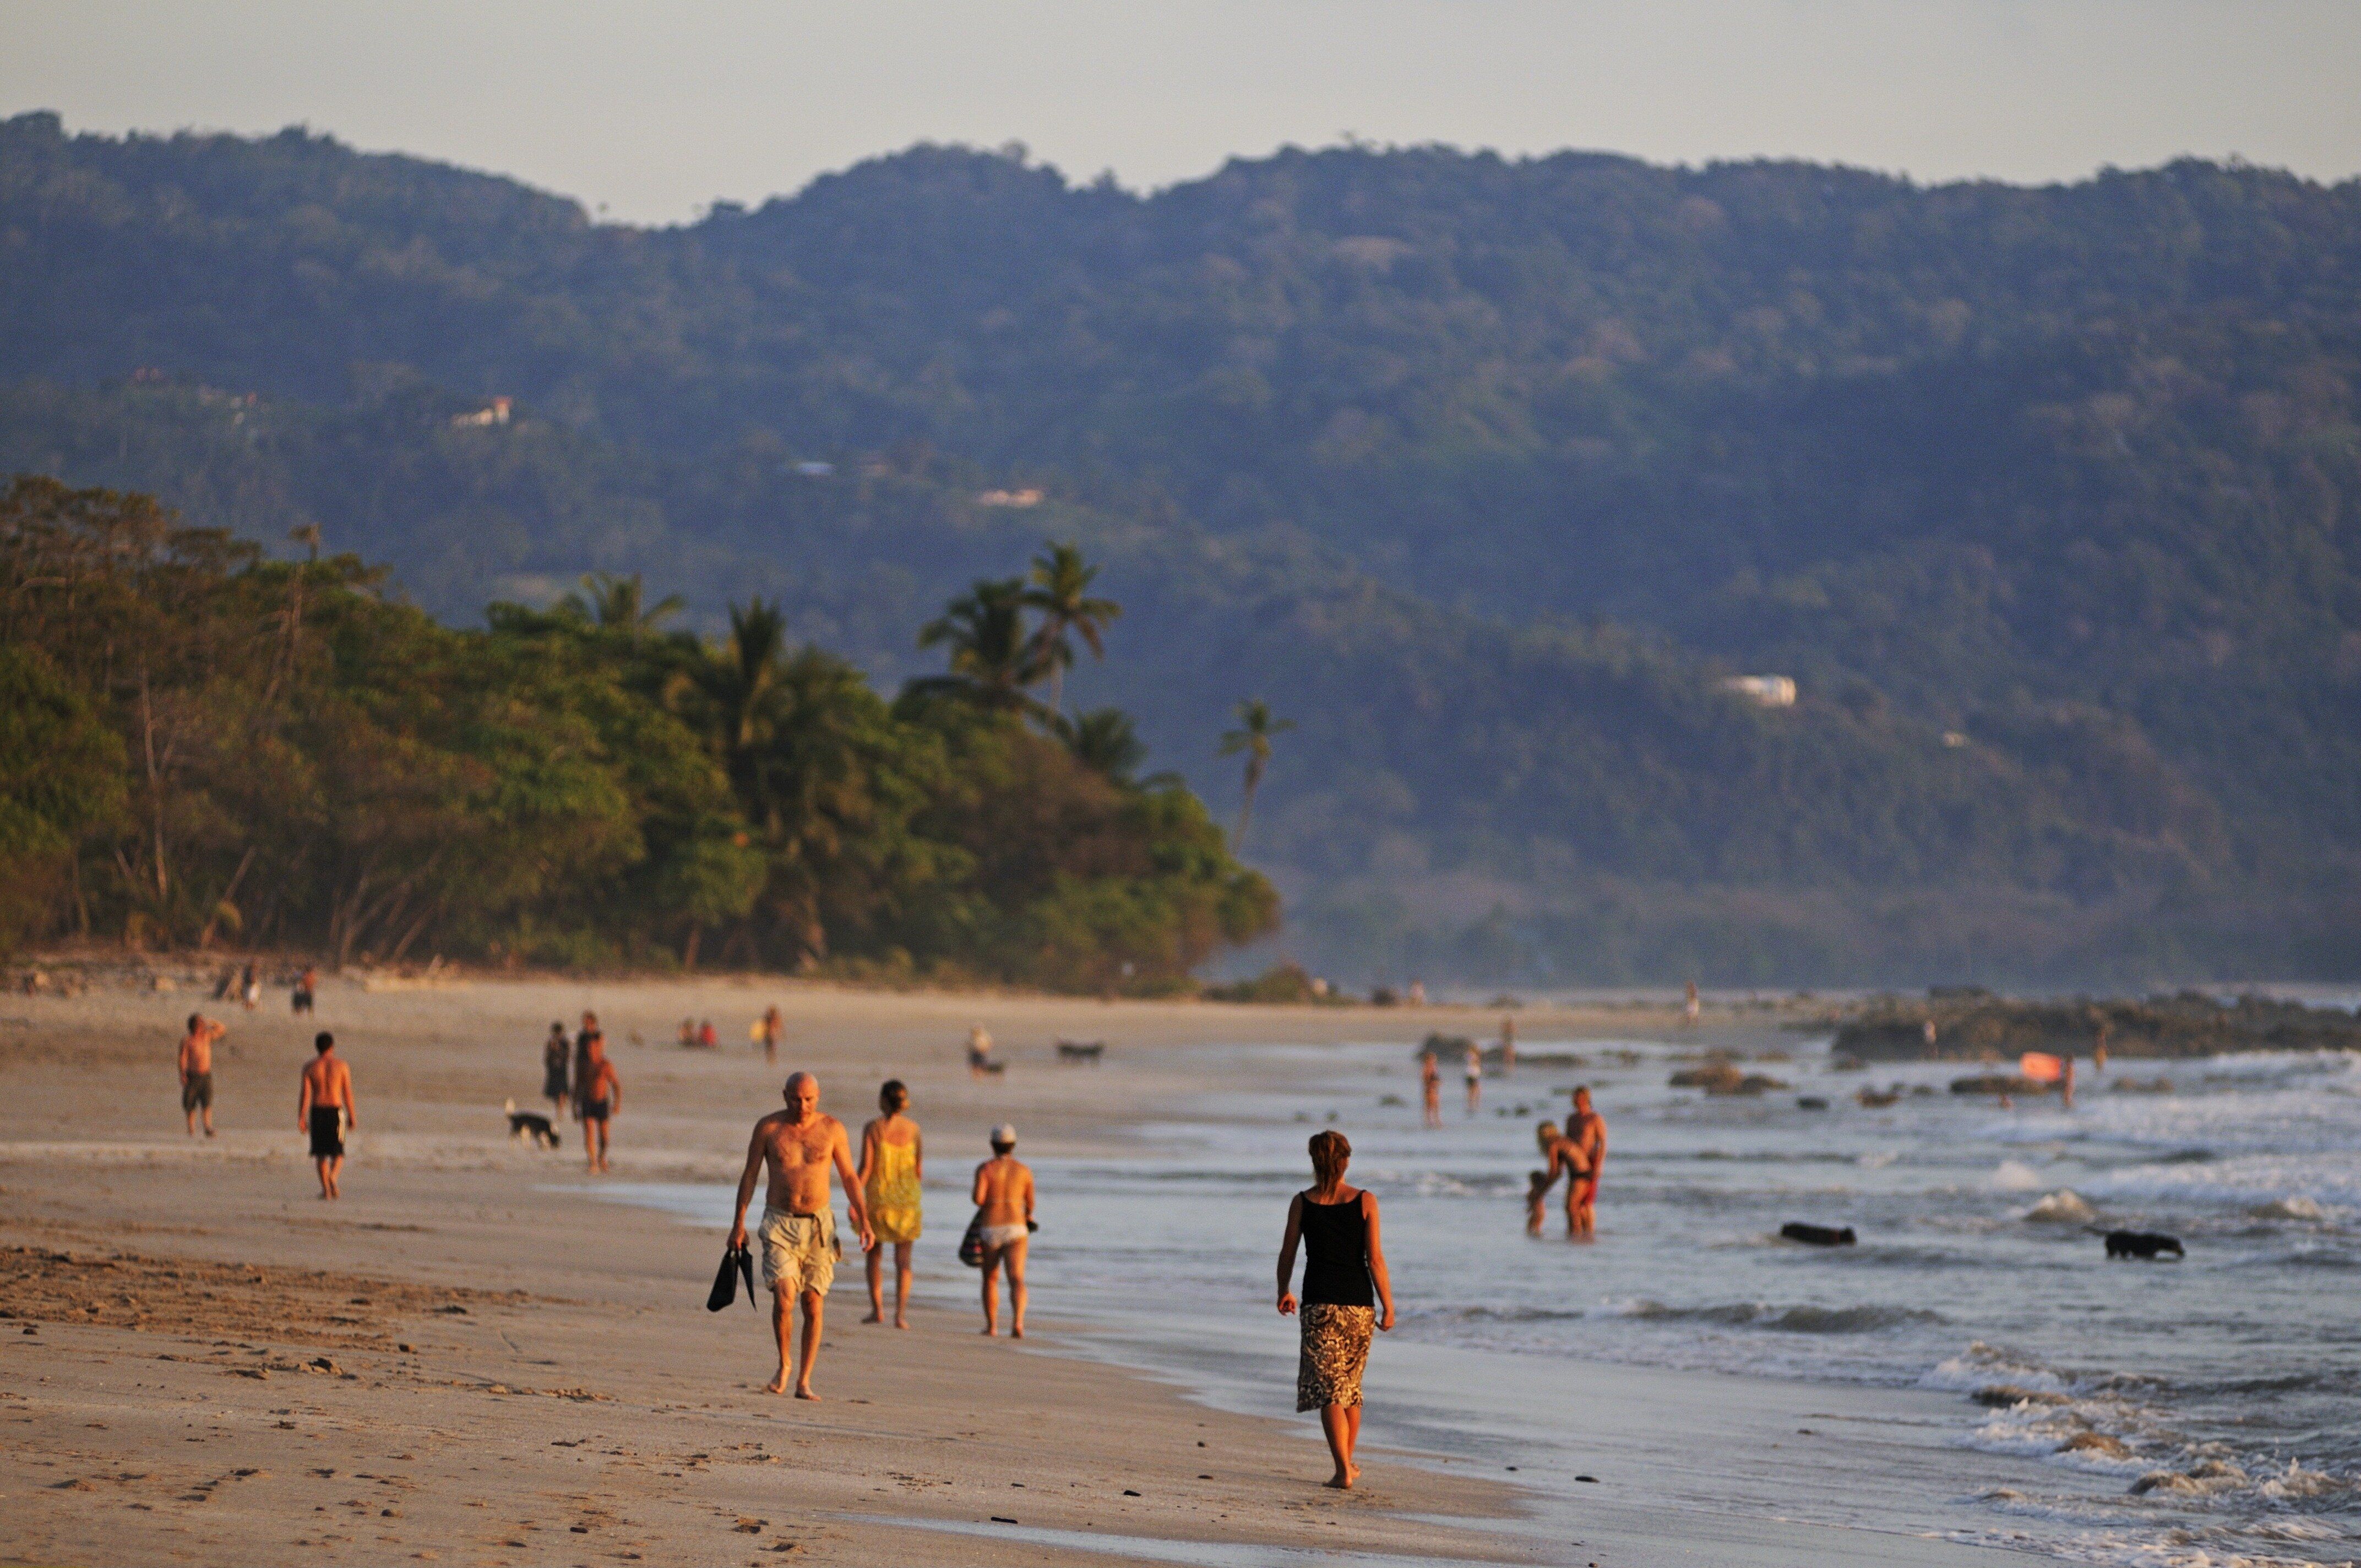 Playa Santa Teresa, a beach on the Nicoya Peninsula in Costa Rica. The people here live some of the longest lives in the world. Credit: Getty Images